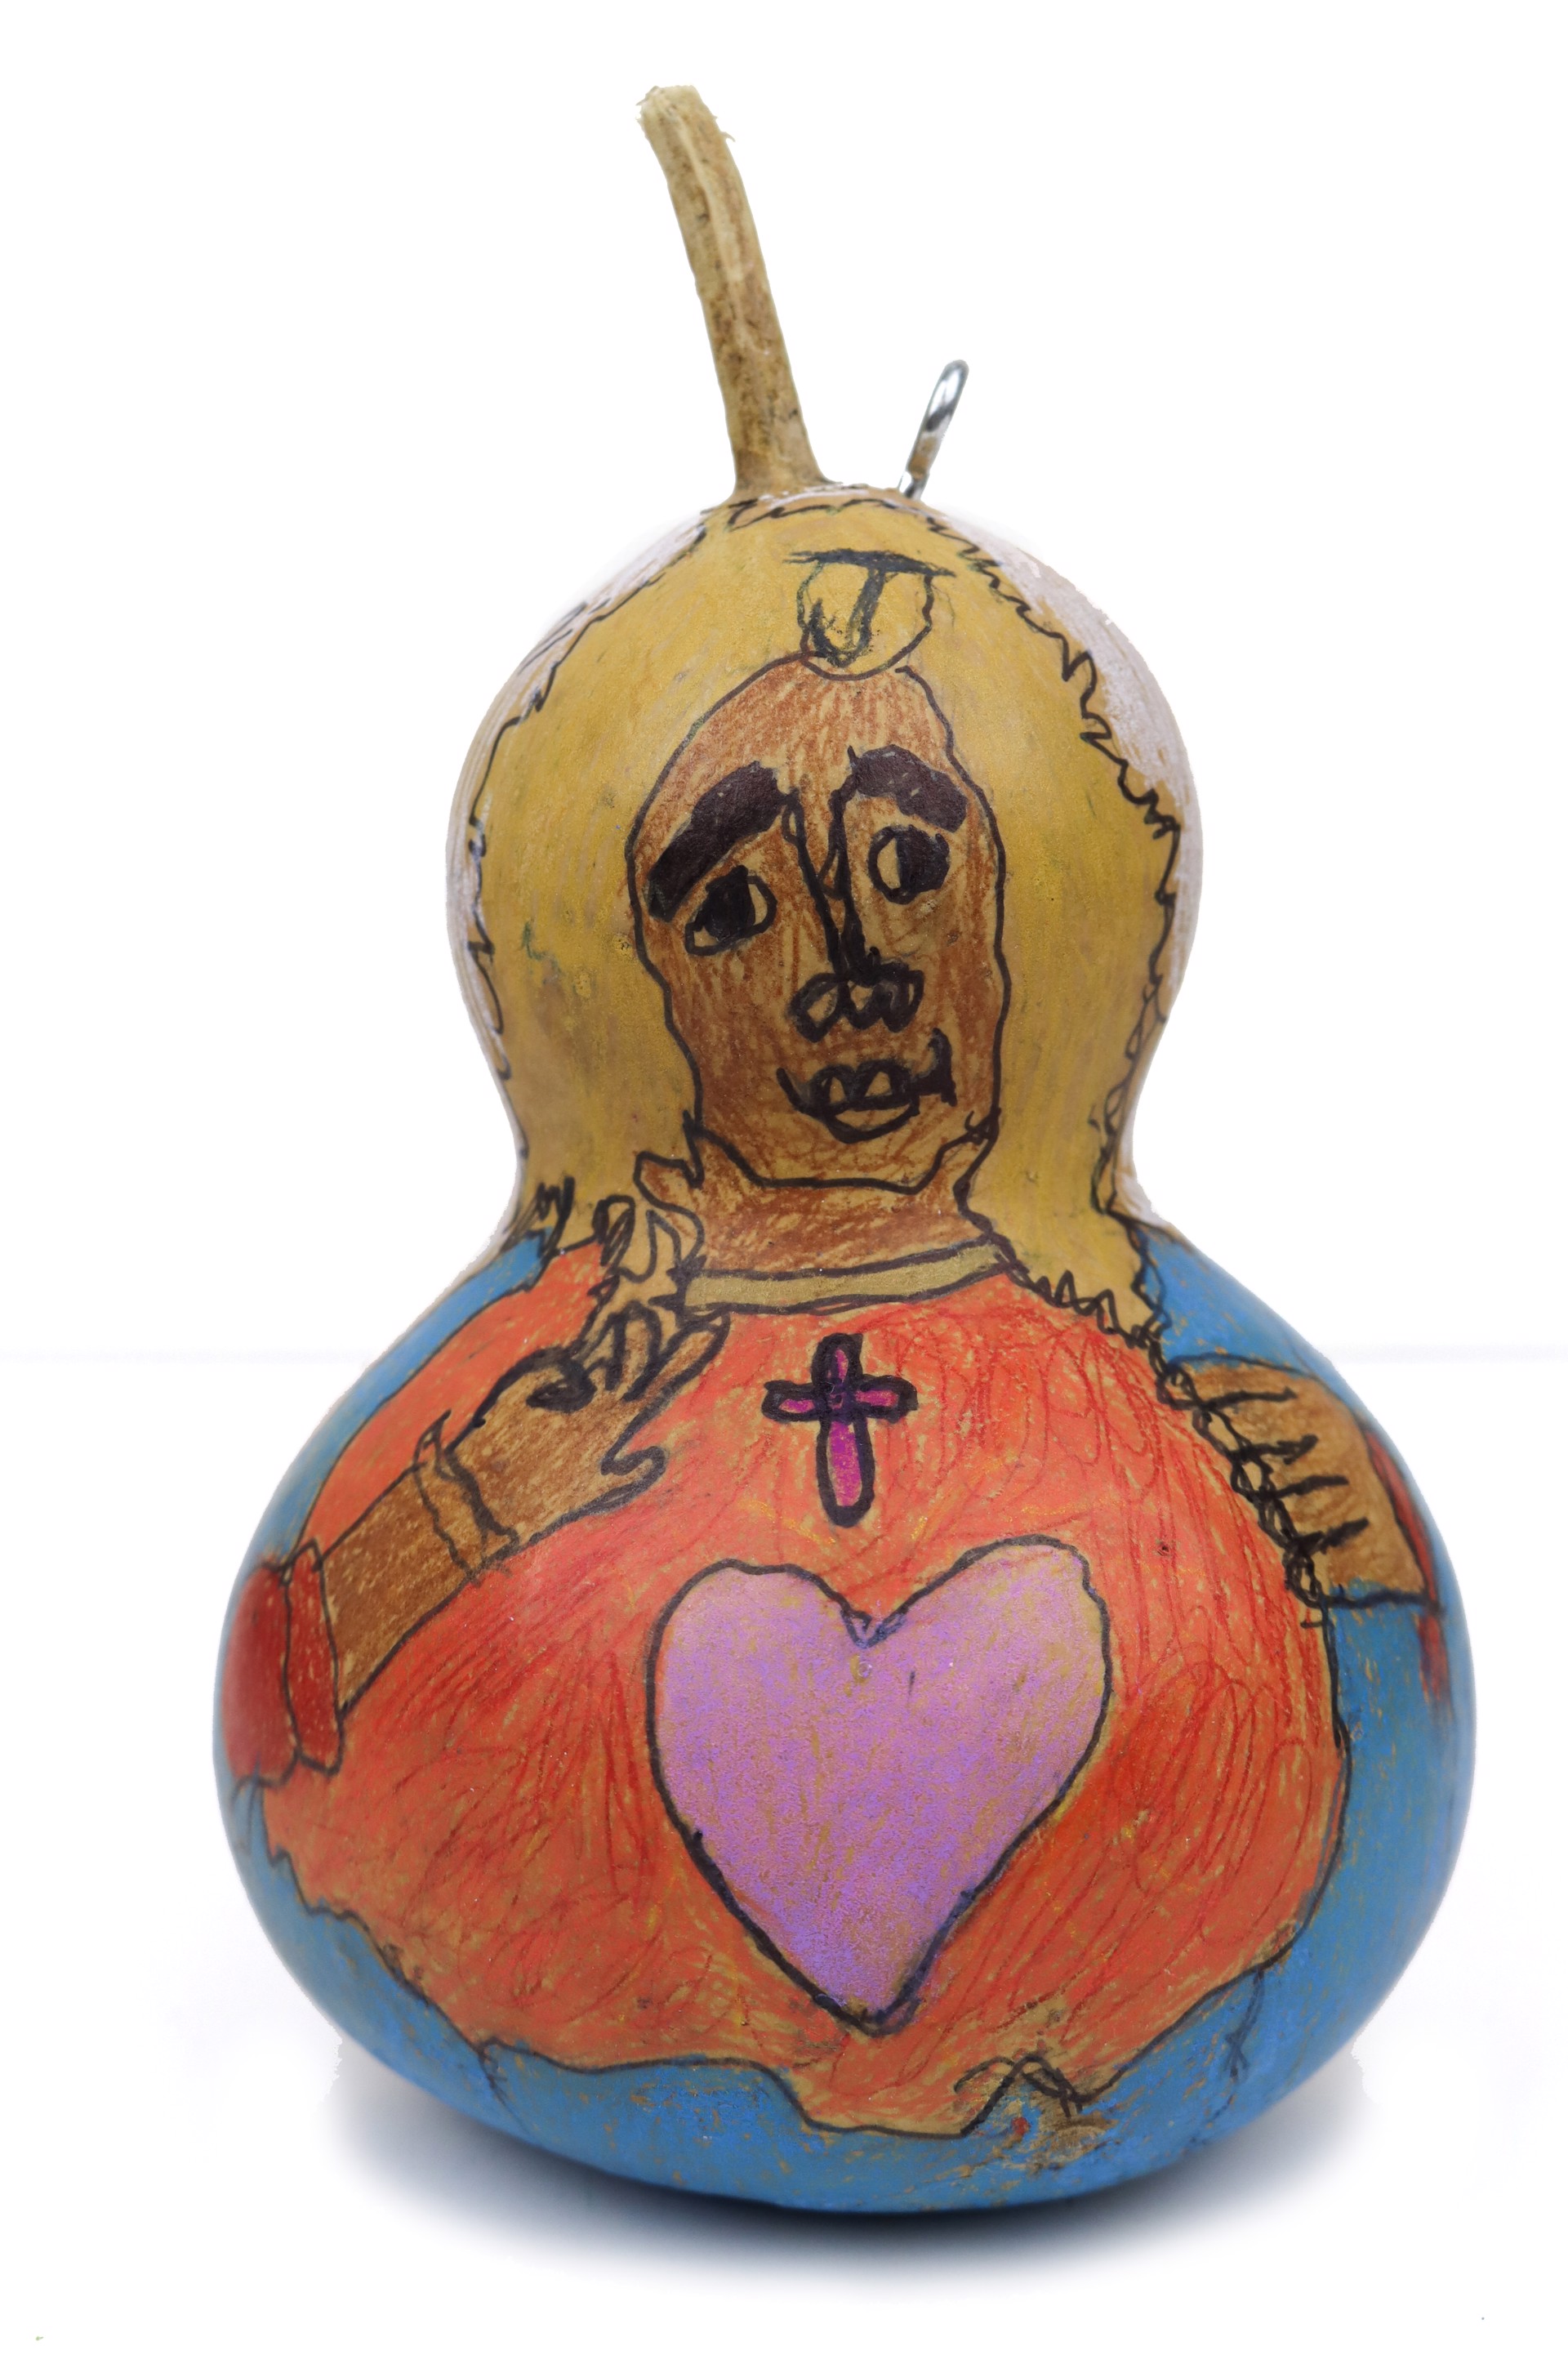 The Presents of God (gourd ornament) by Imani Turner